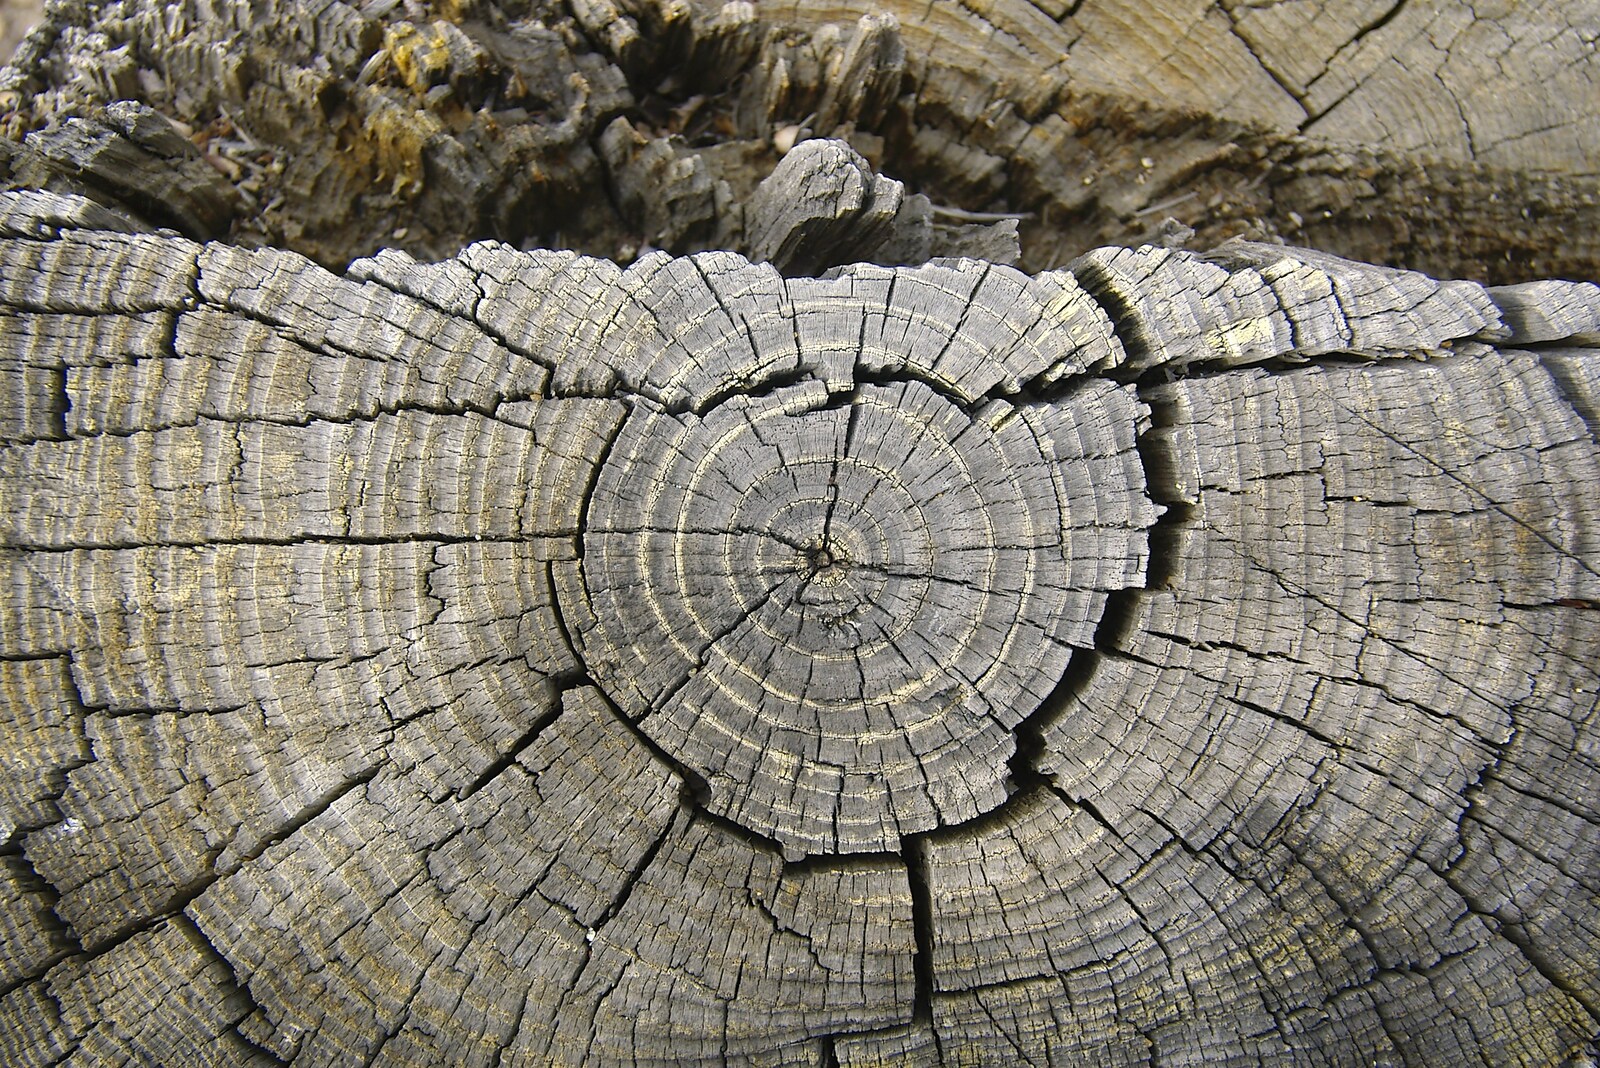 Cracked tree rings from California Snow: San Bernadino State Forest, California, US - 26th March 2006